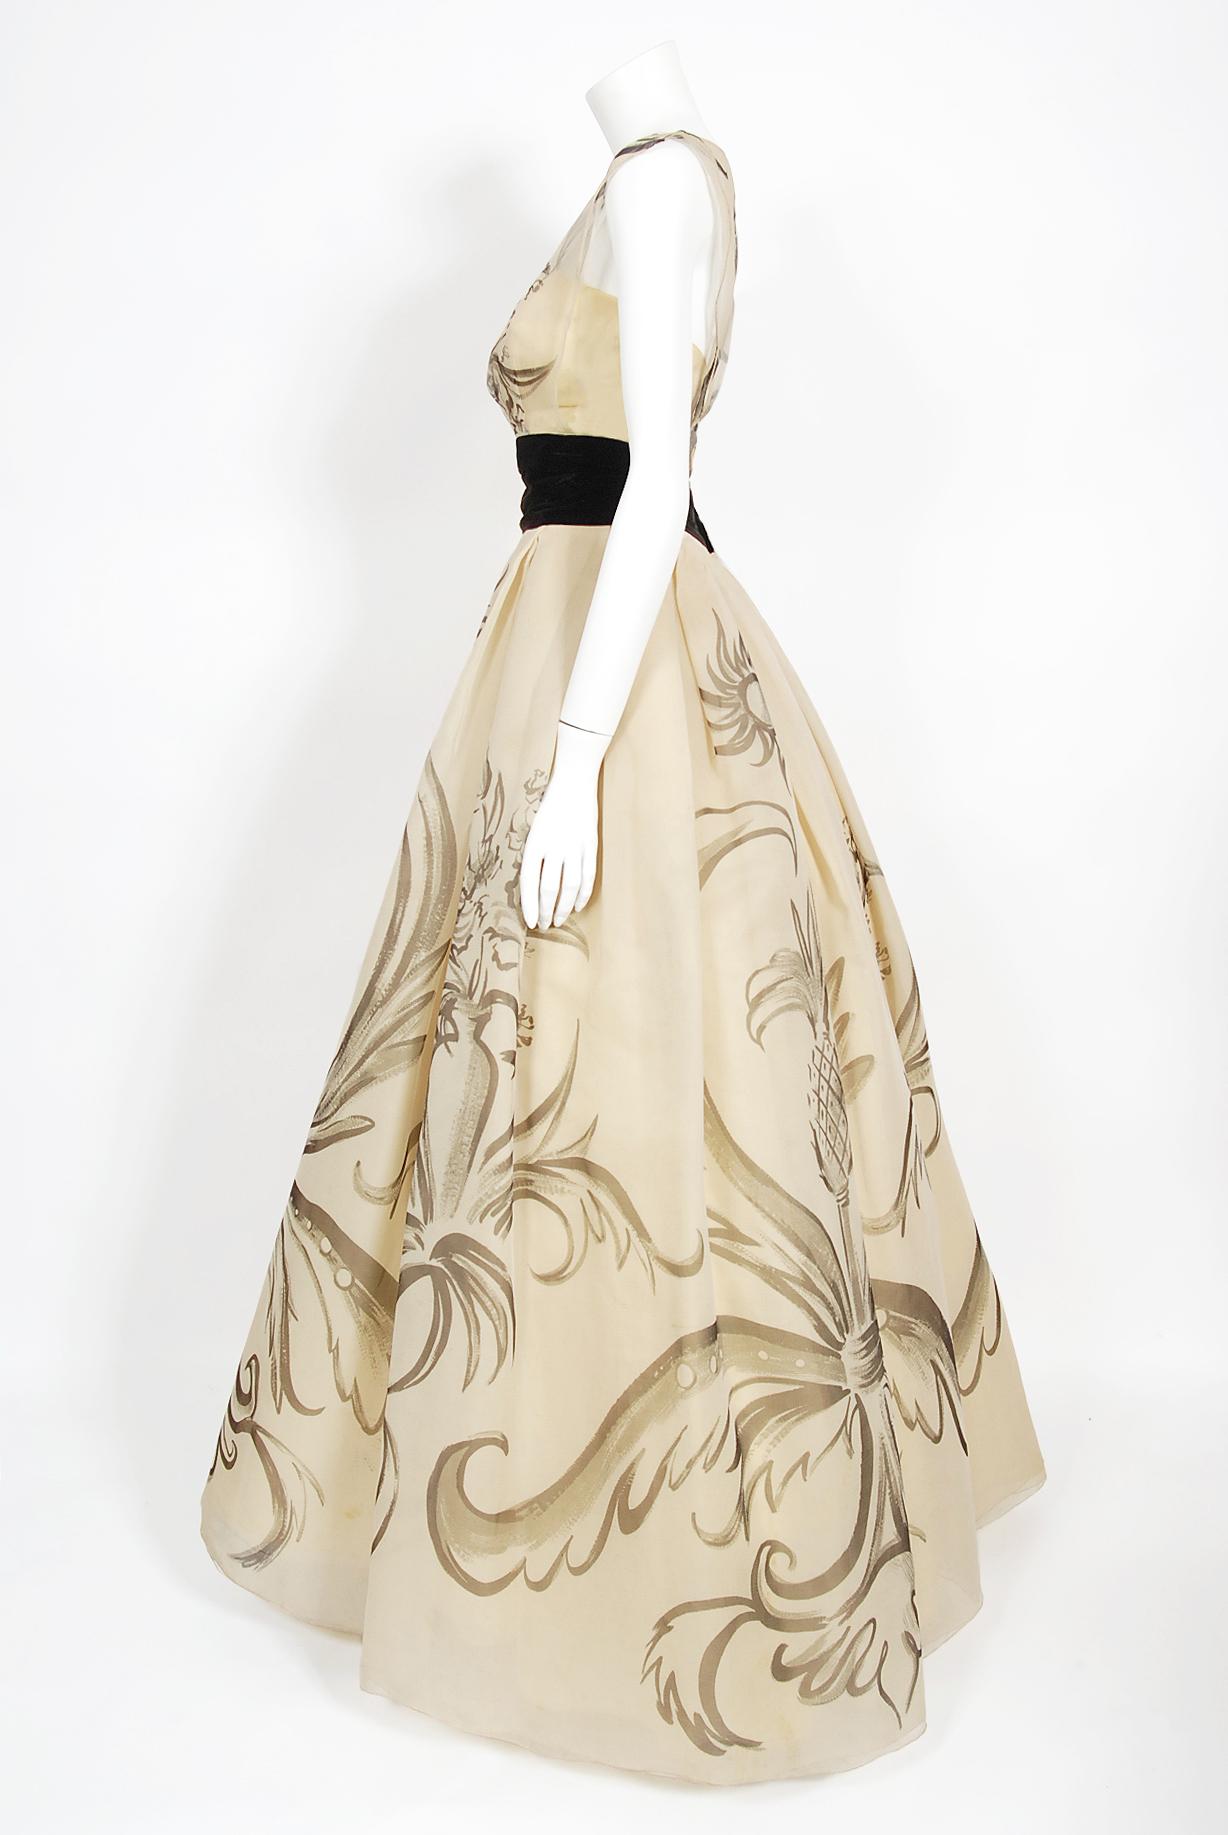 Vintage 1950's Hattie Carnegie Couture Whimsical Hand-Painted Cream Silk Gown  4